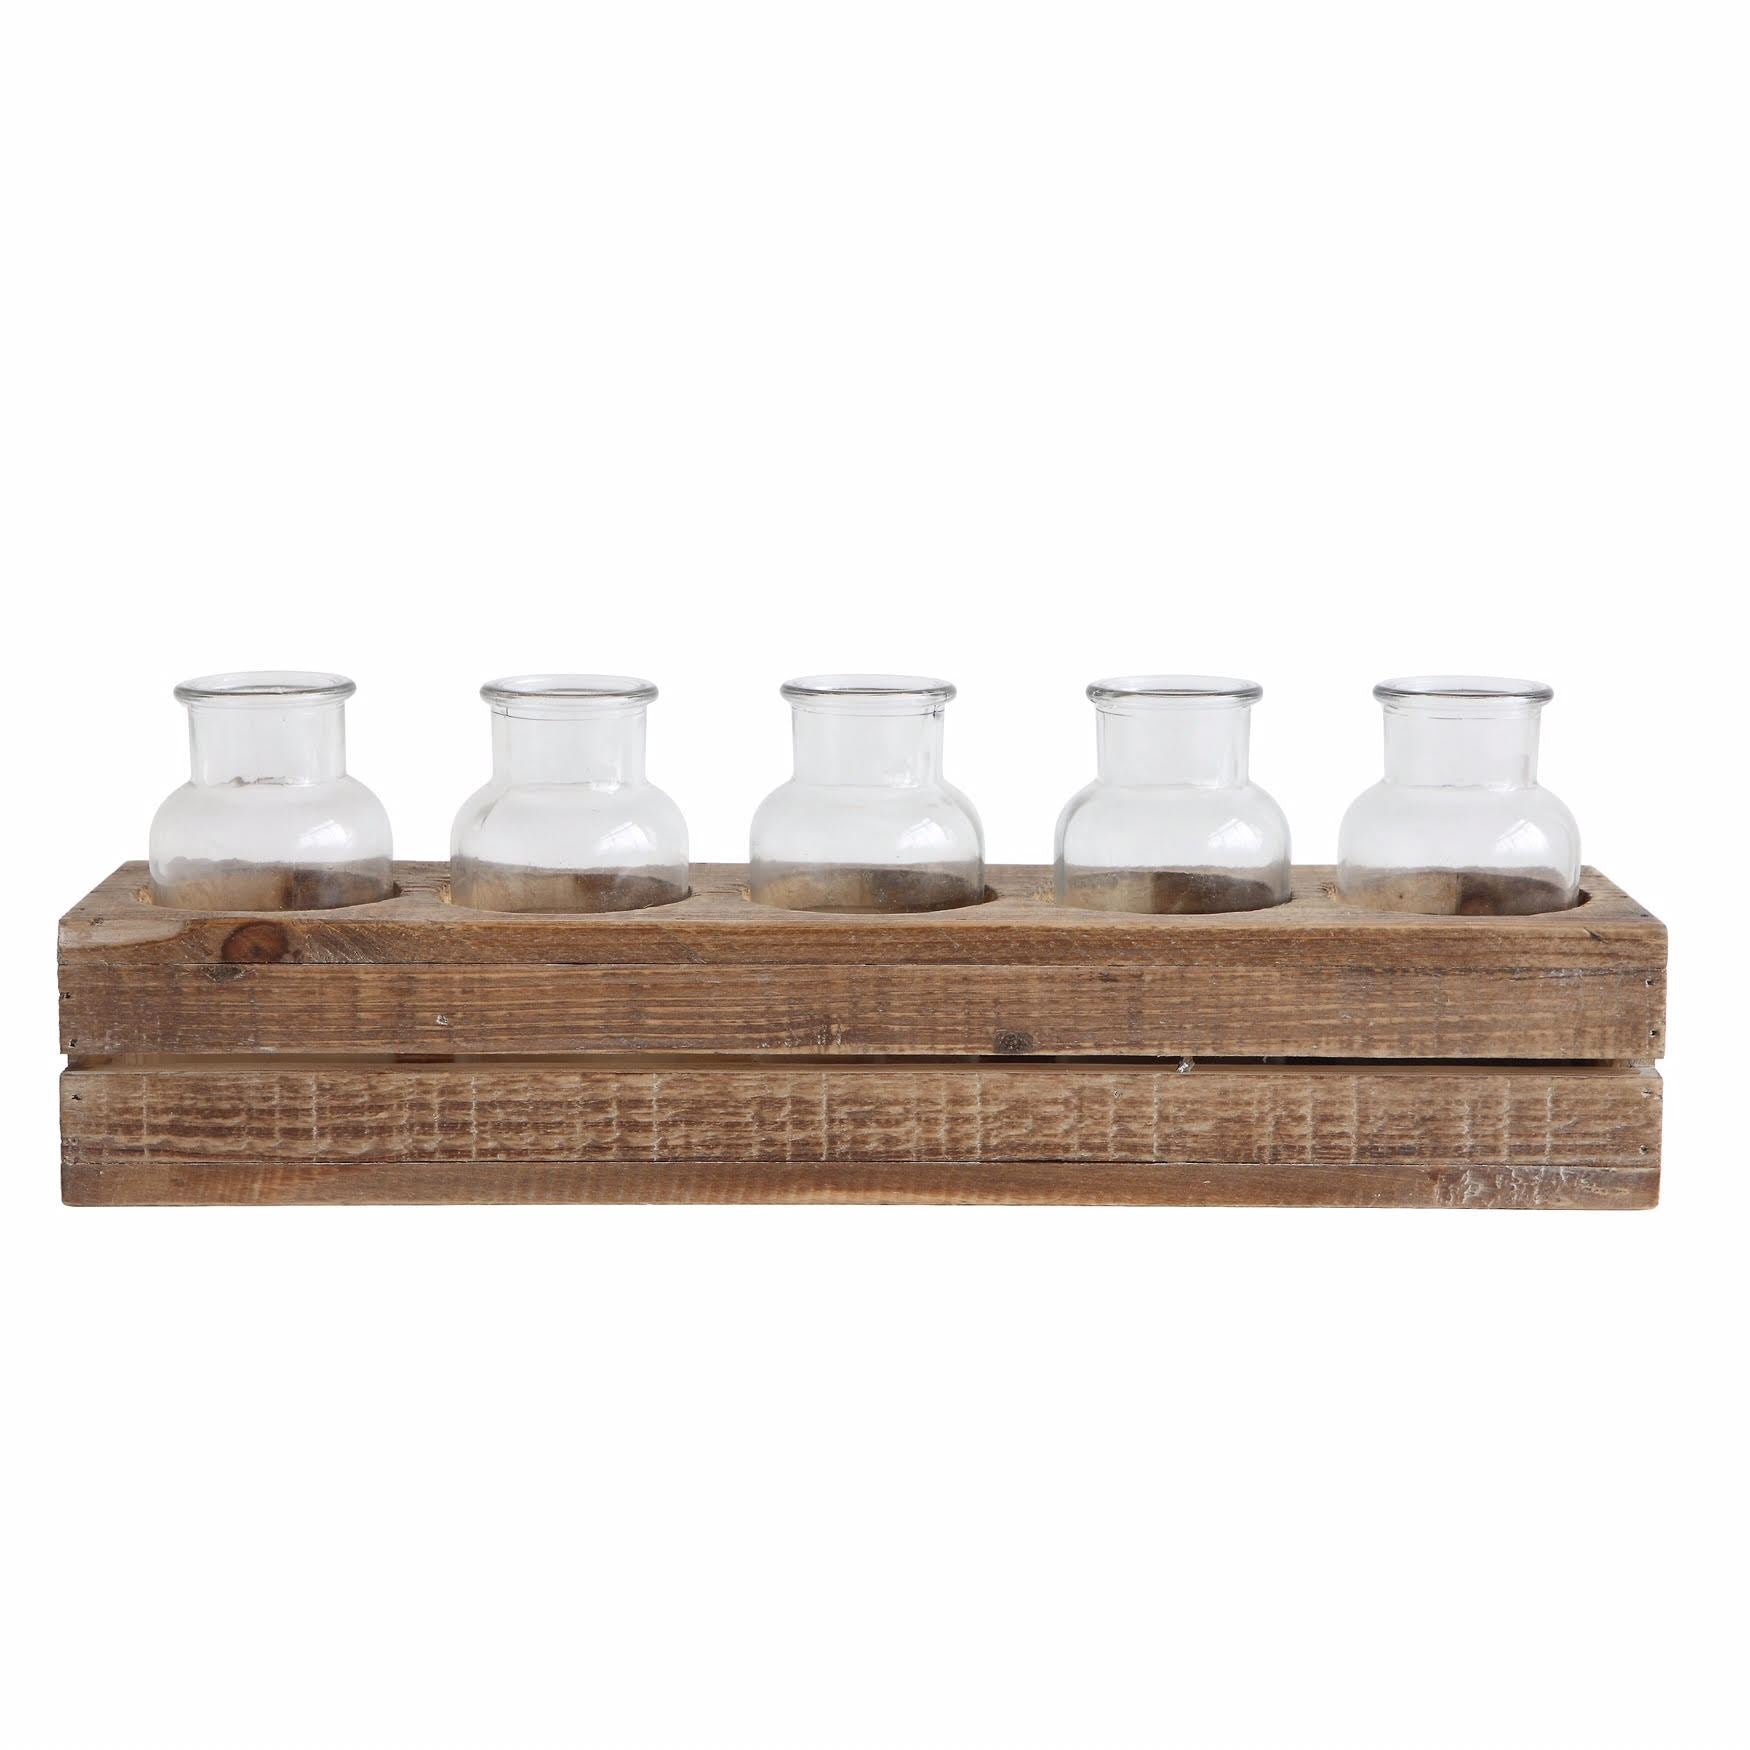 Wood Crate with 5 Glass Bottles